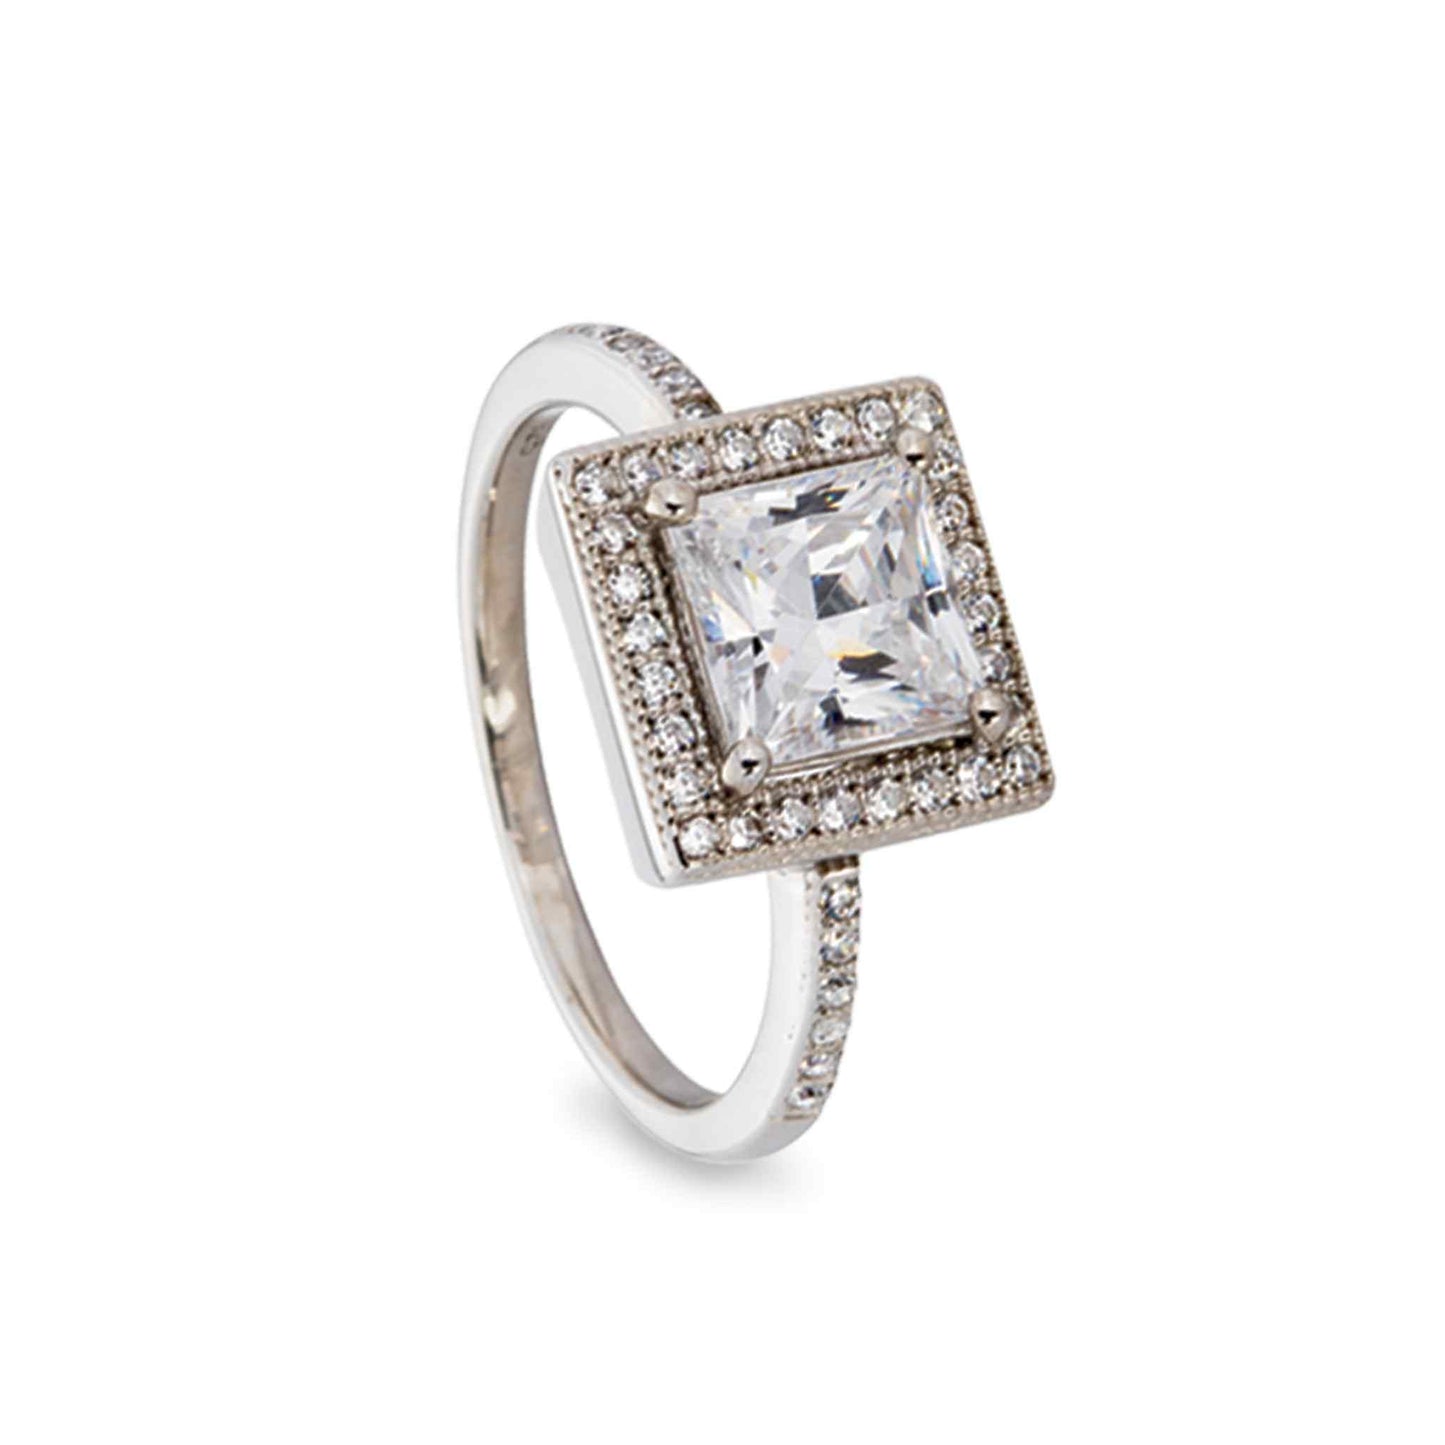 A princess cut tiffany style ring with 41 simulated diamonds displayed on a neutral white background.